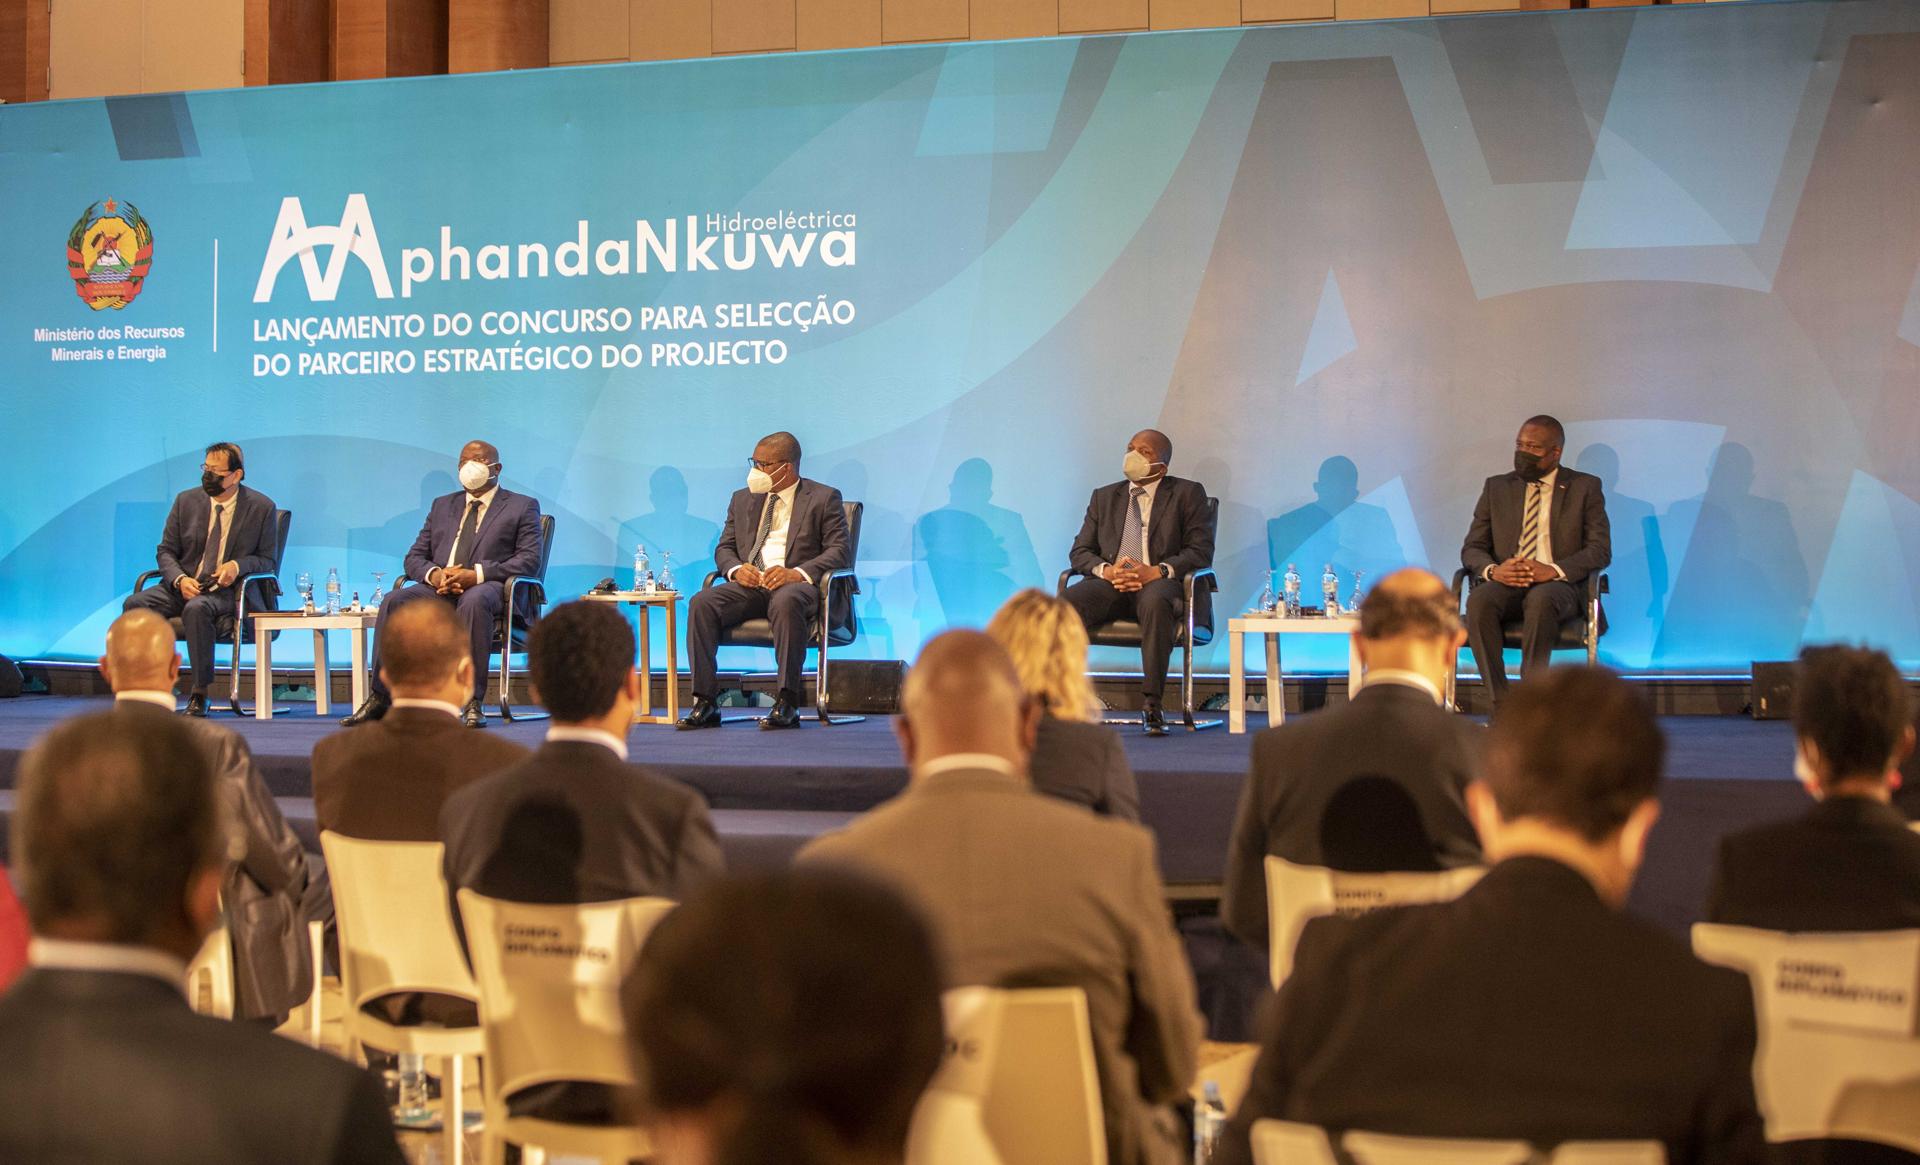 Mphanda Nkuwa tender launched – Noticias - Mozambique